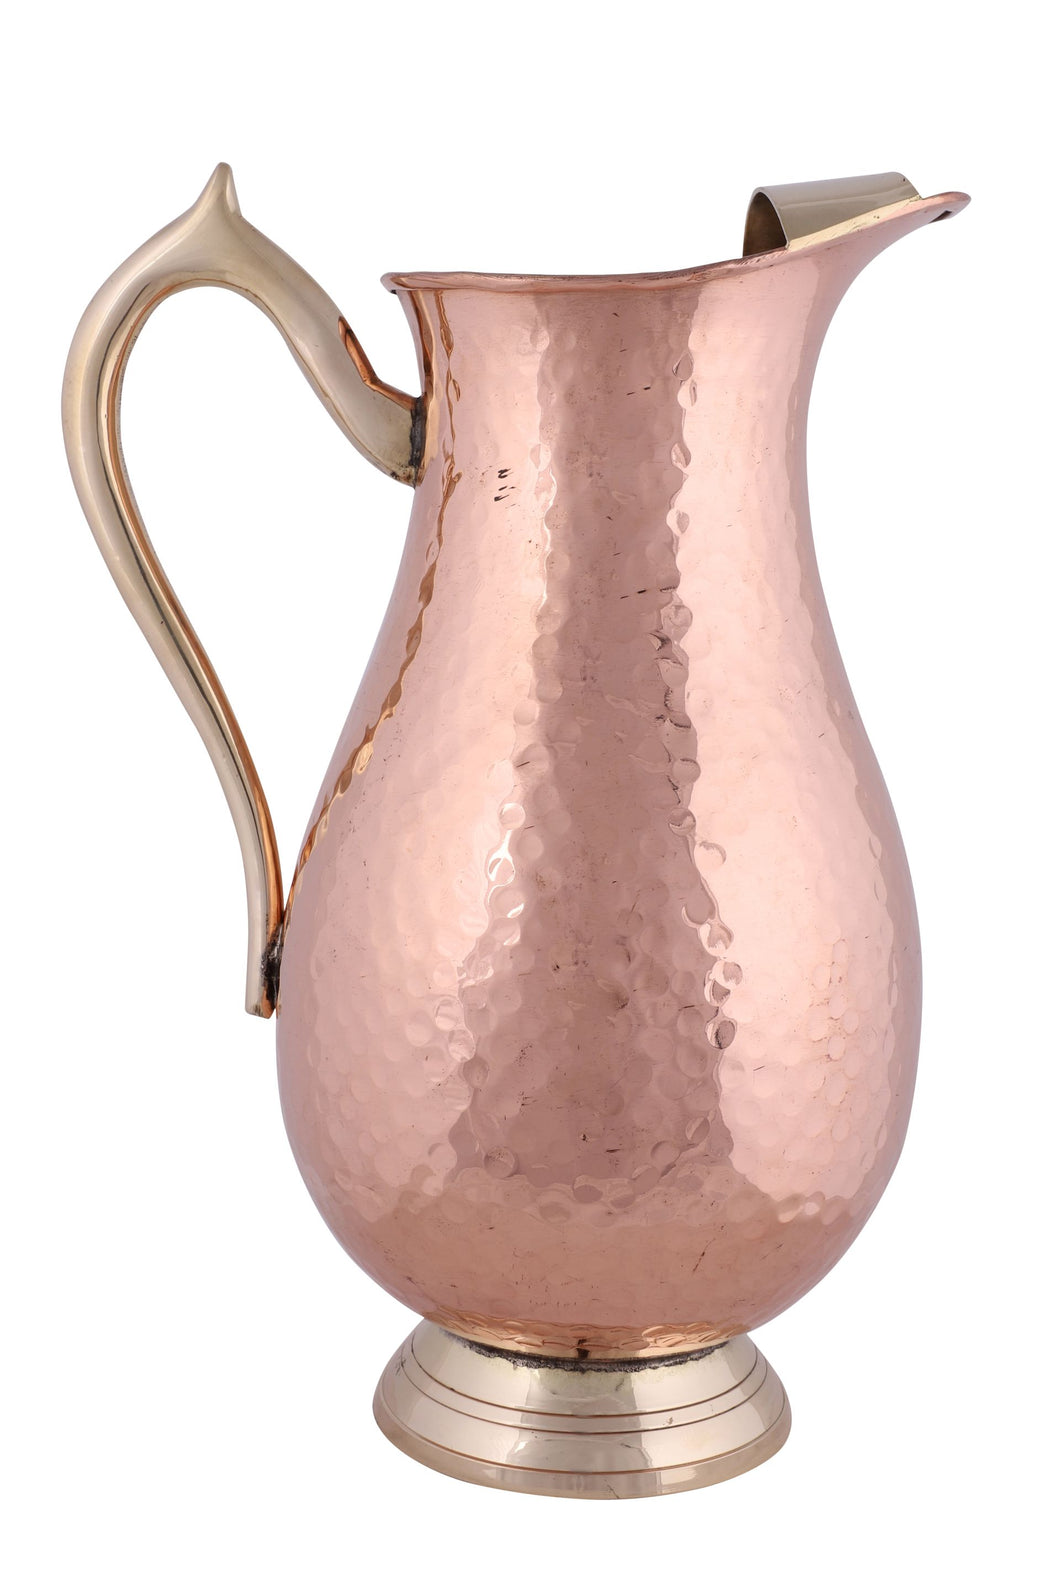 Copper Hammered Mughlai Jug Pitcher with Brass Handle, 1.5 Liters